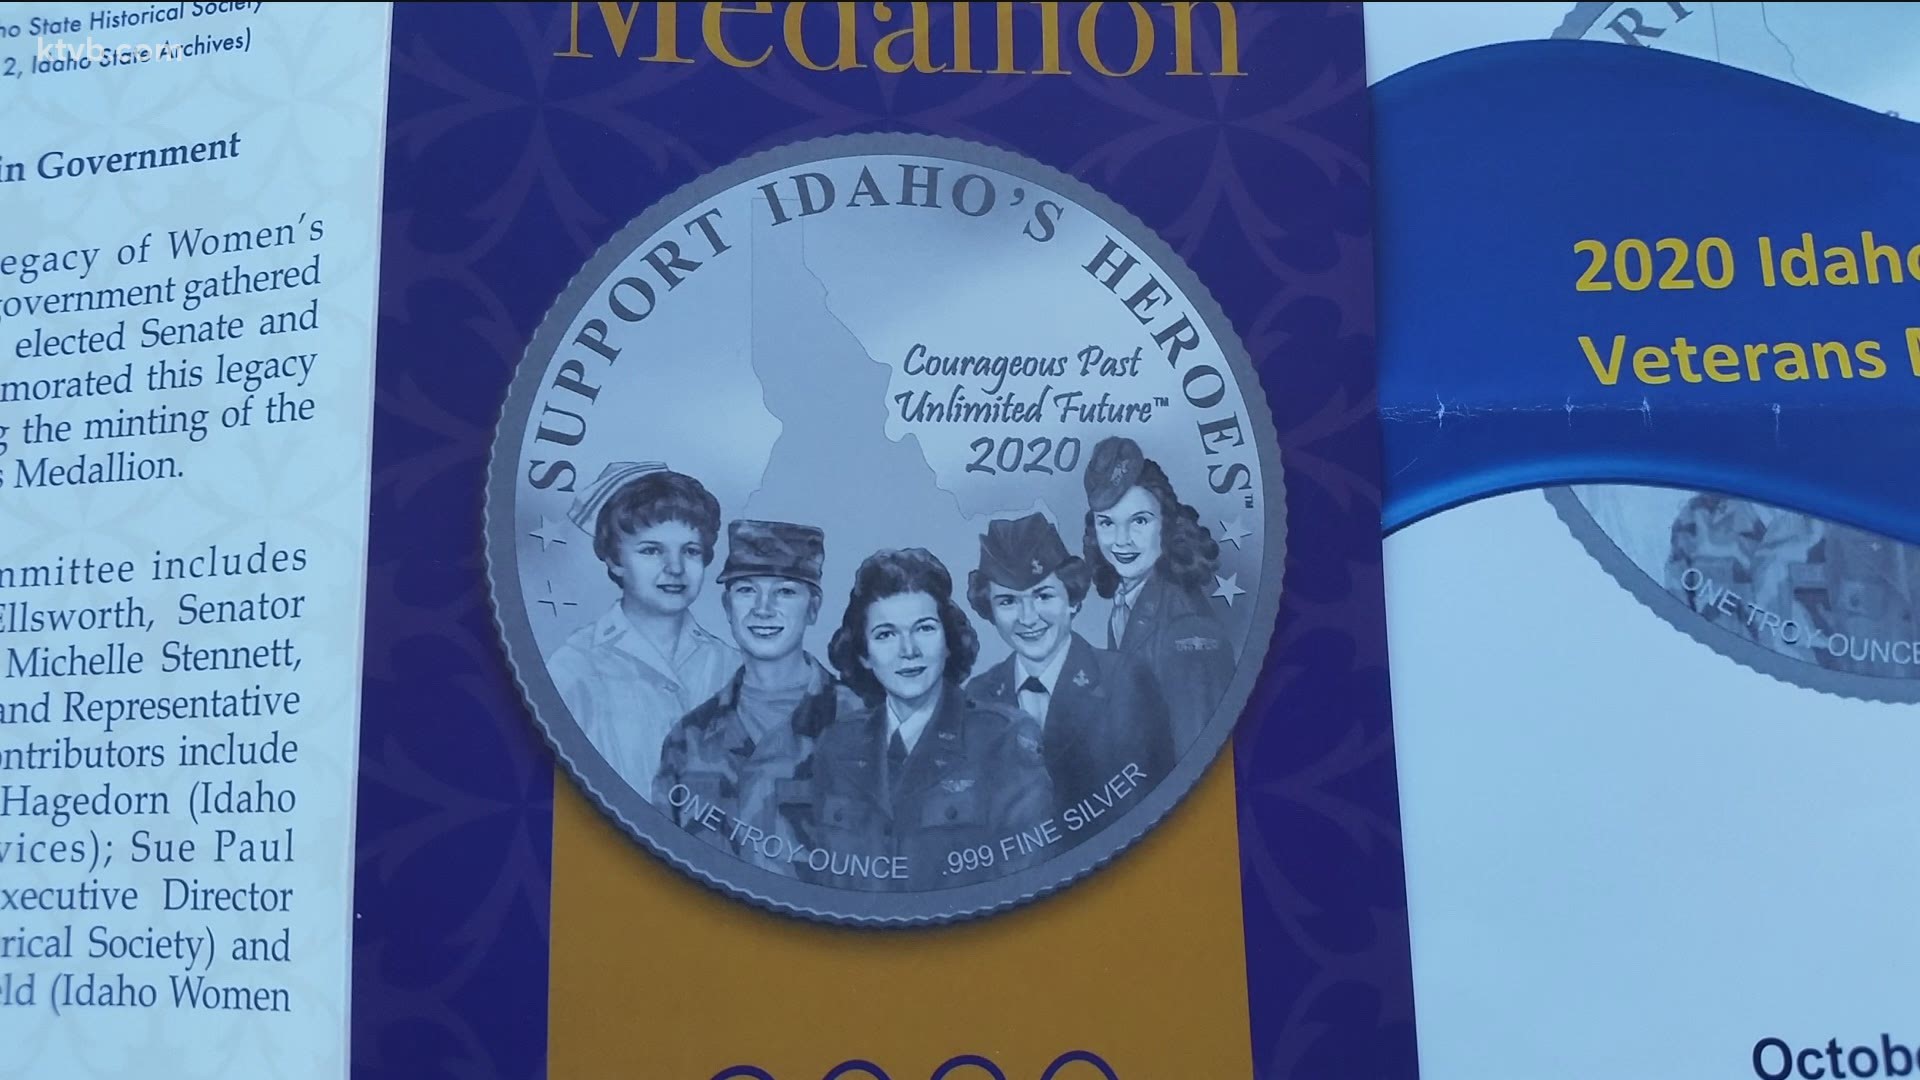 A ceremony was held at the Warhawk Air Museum in Nampa Monday to unveil the new medallion to honor Idaho women in the military.